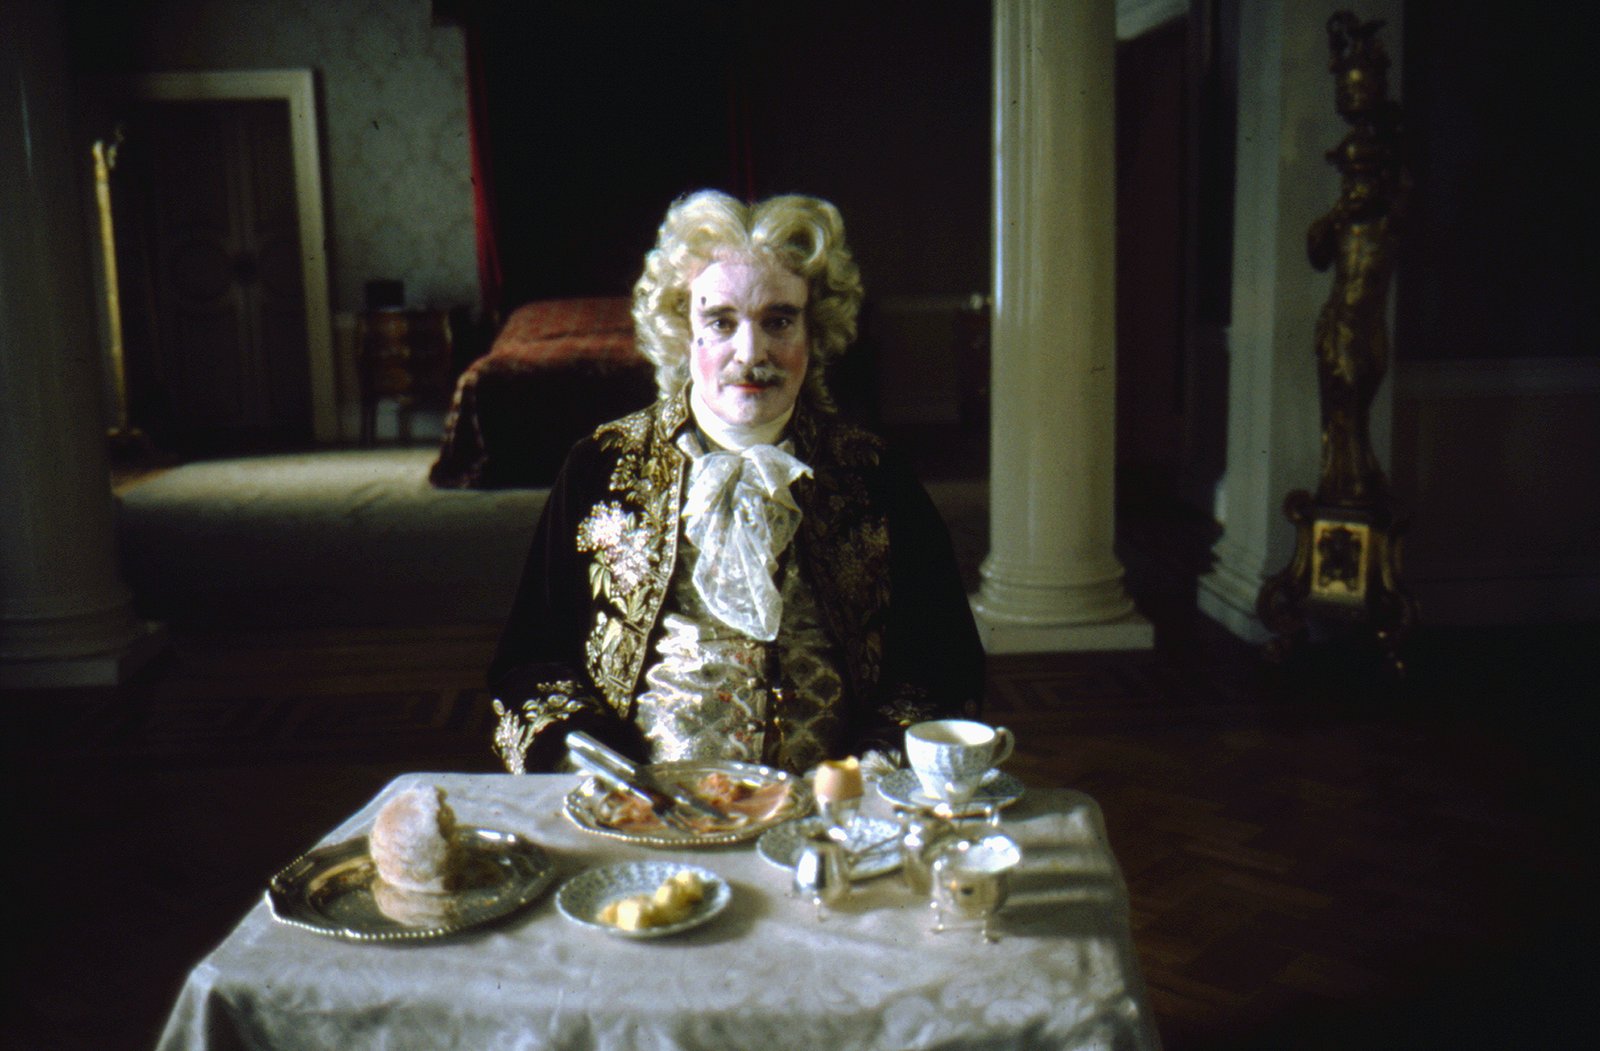 Barry Lyndon, directed by Stanley Kubrick (1973-75; GB/United States). The Chevalier de Balibari (James Magee). © Warner Bros. Entertainment Inc.